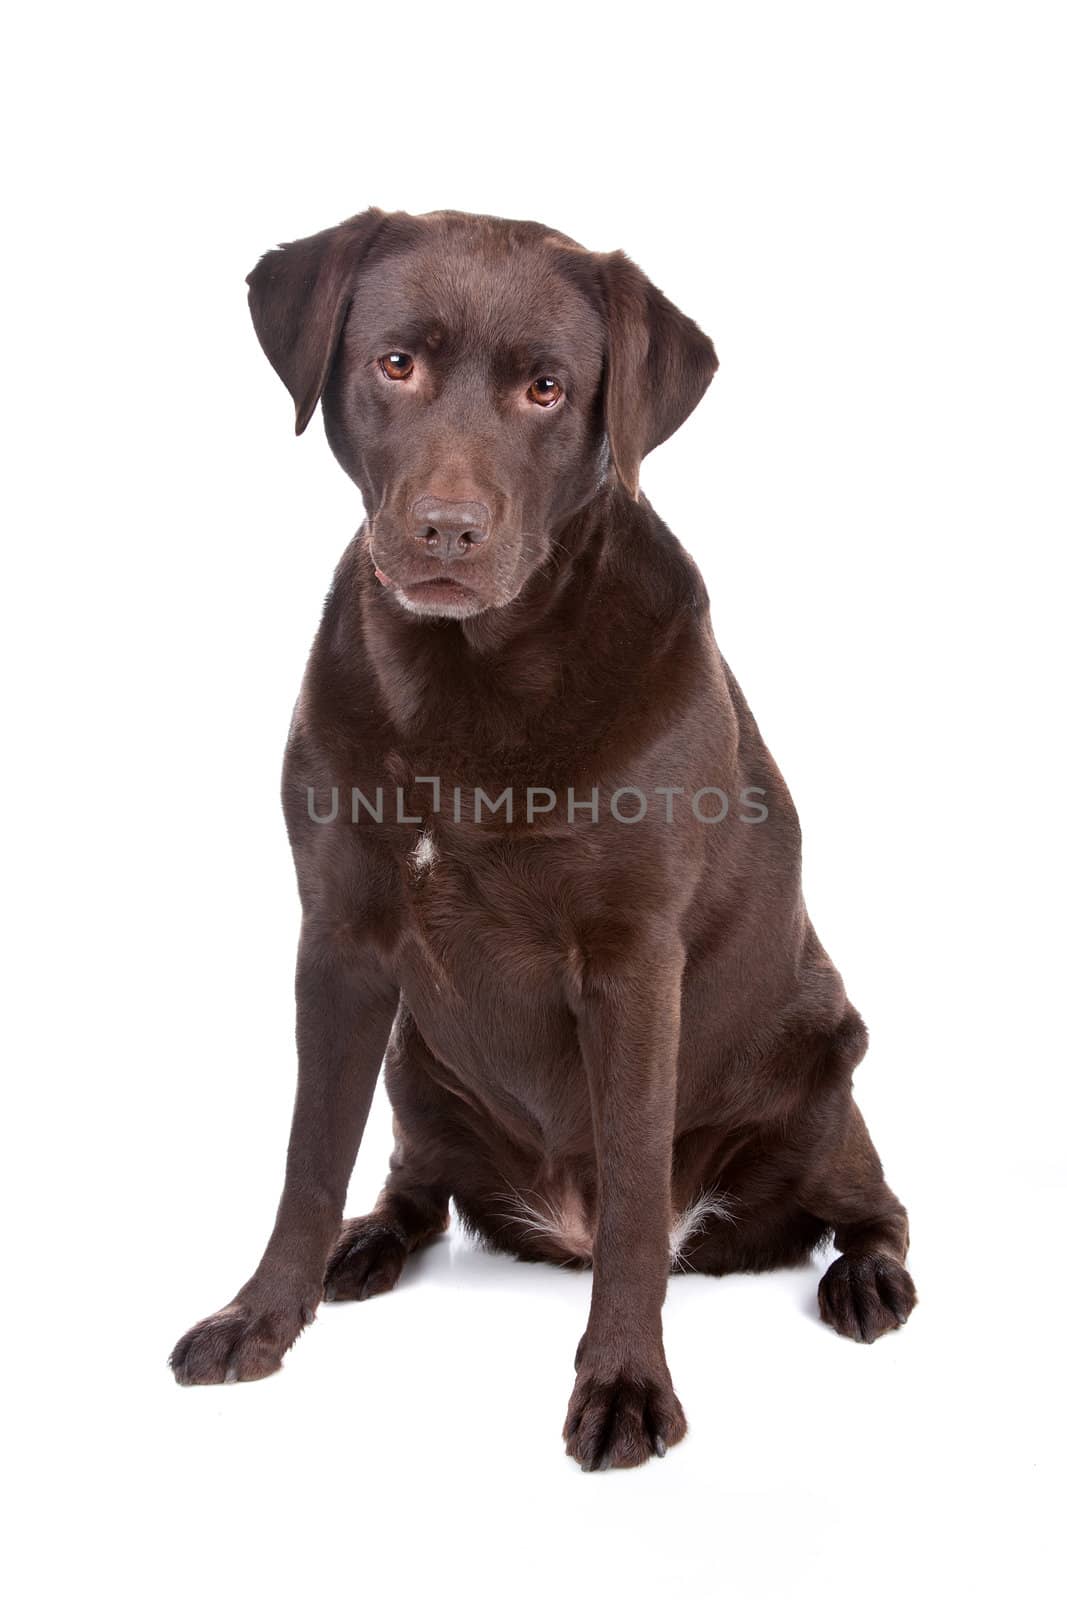 Chocolate Labrador Retriever dog sitting isolated on a white background